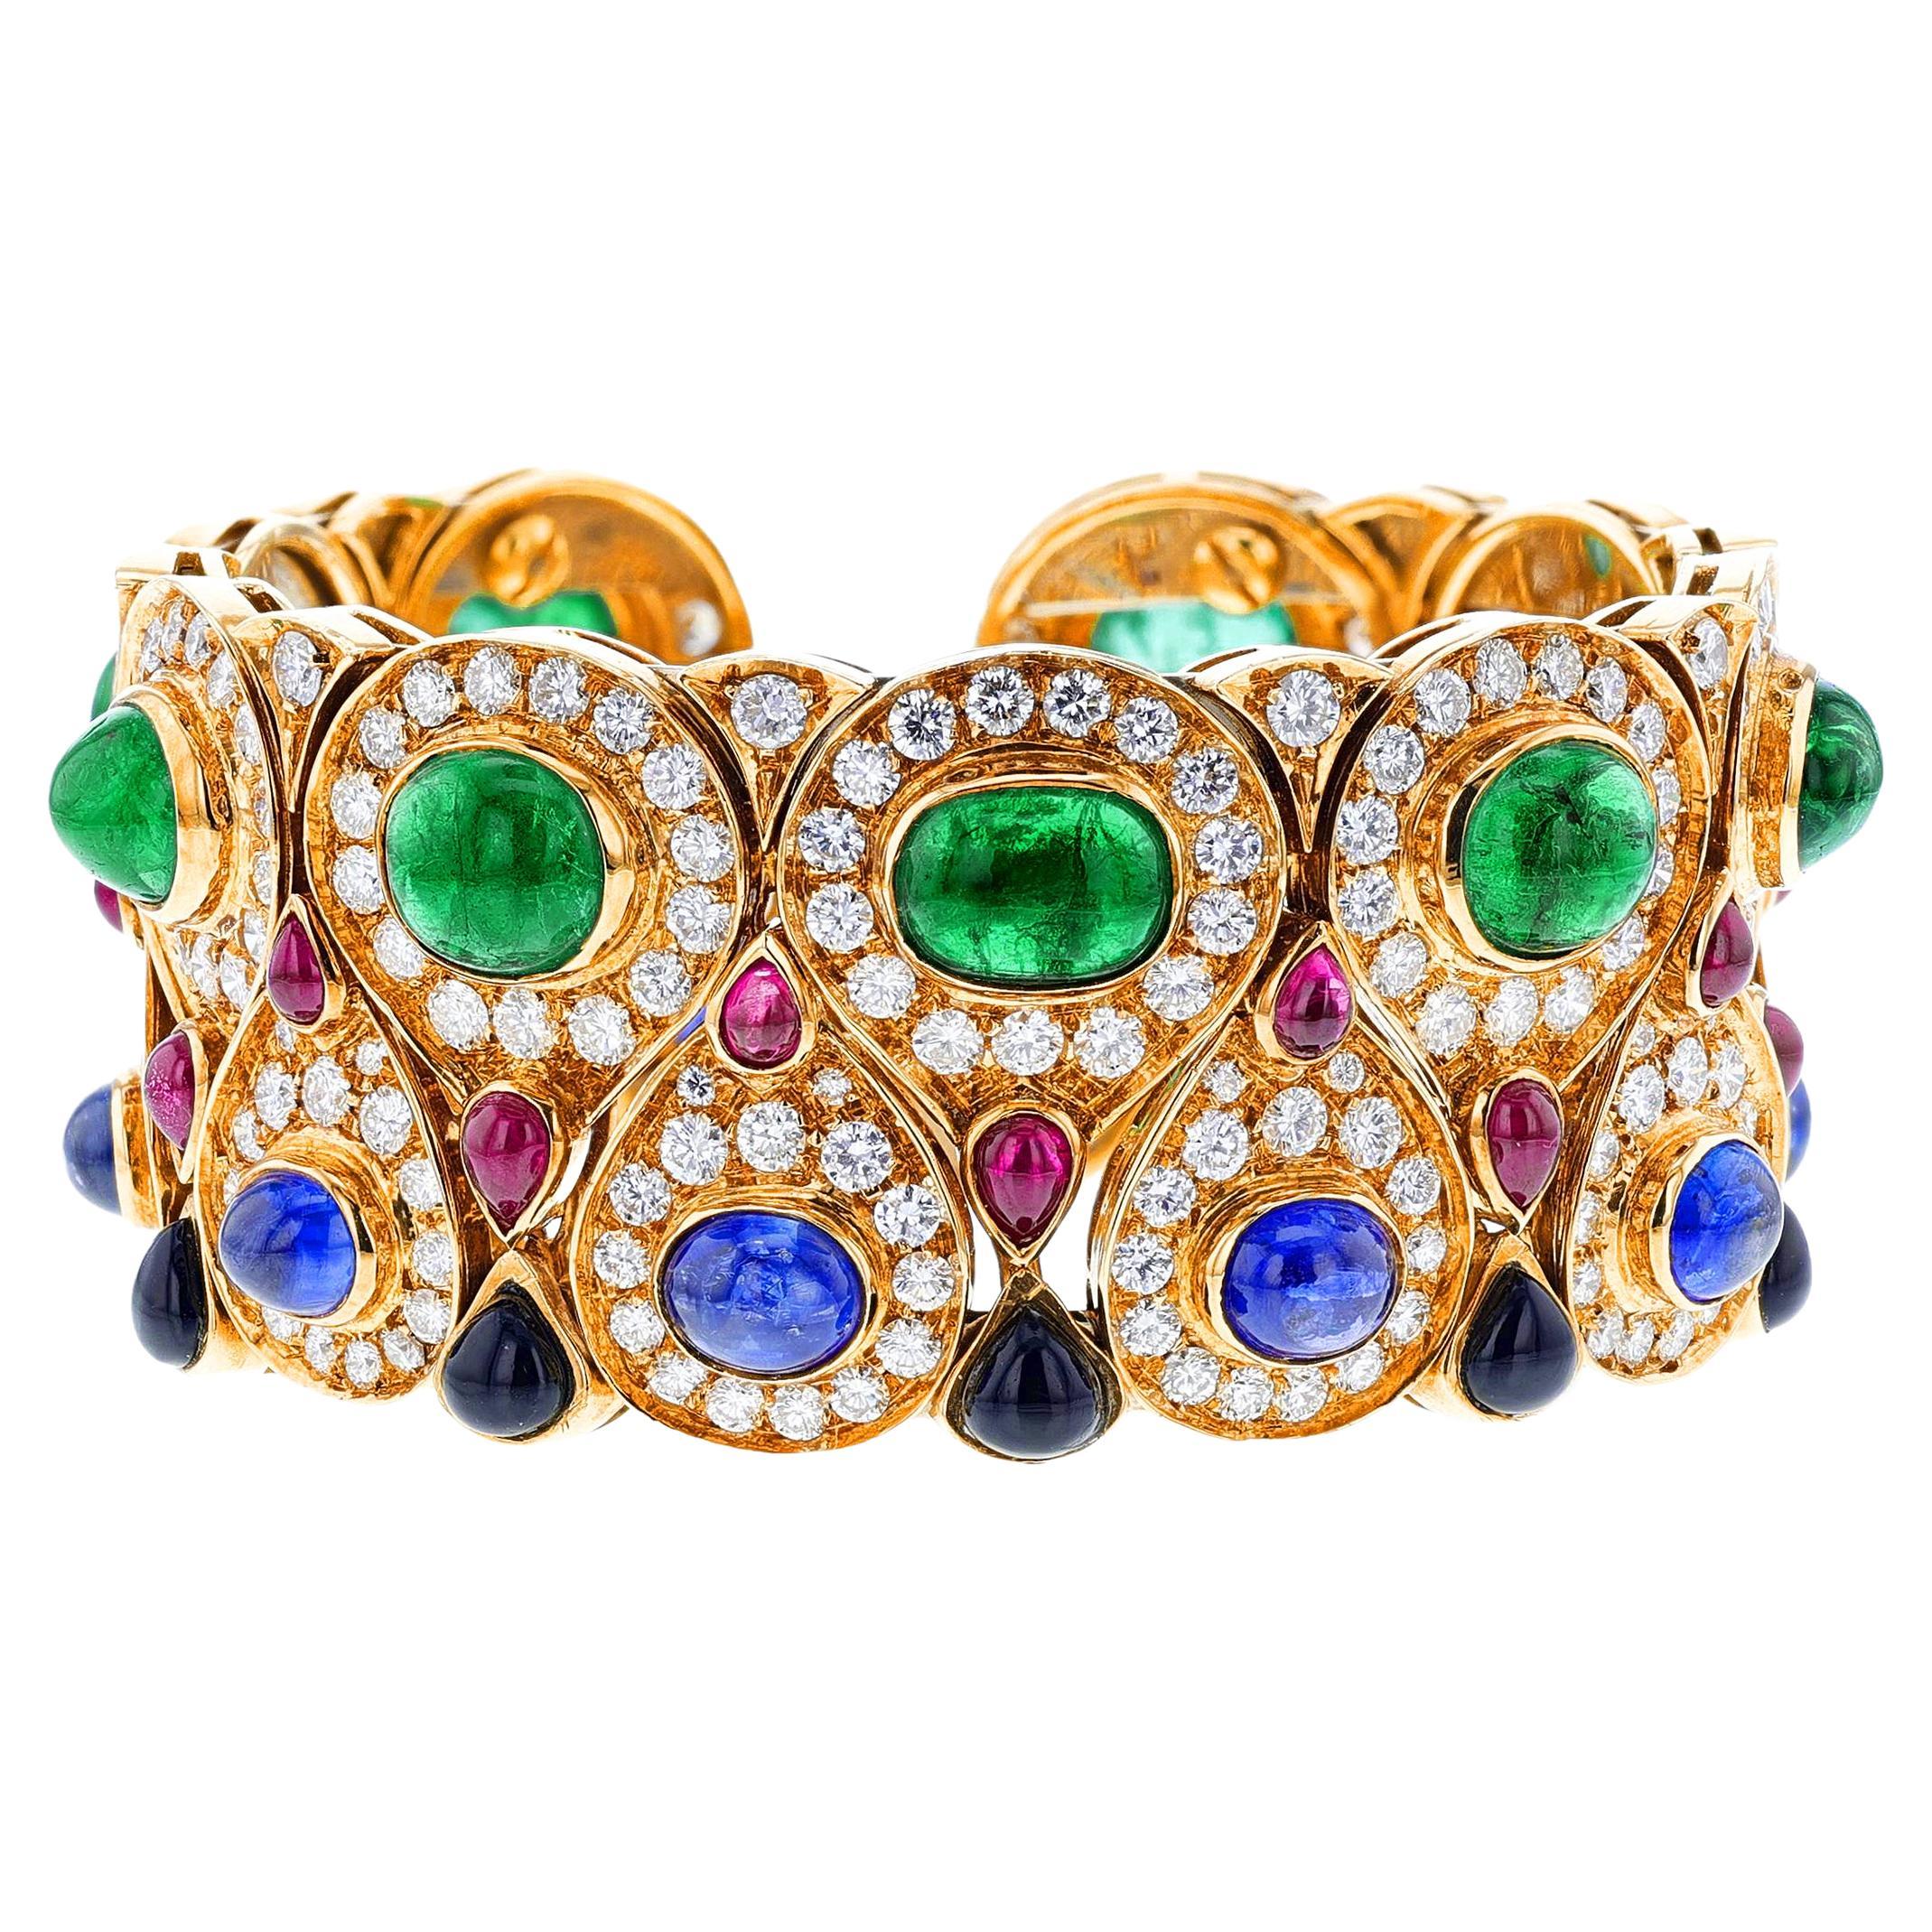 Multi-Gemstone Adjustable Bangle with Emerald, Diamond, Ruby, Sapphire and Onyx For Sale